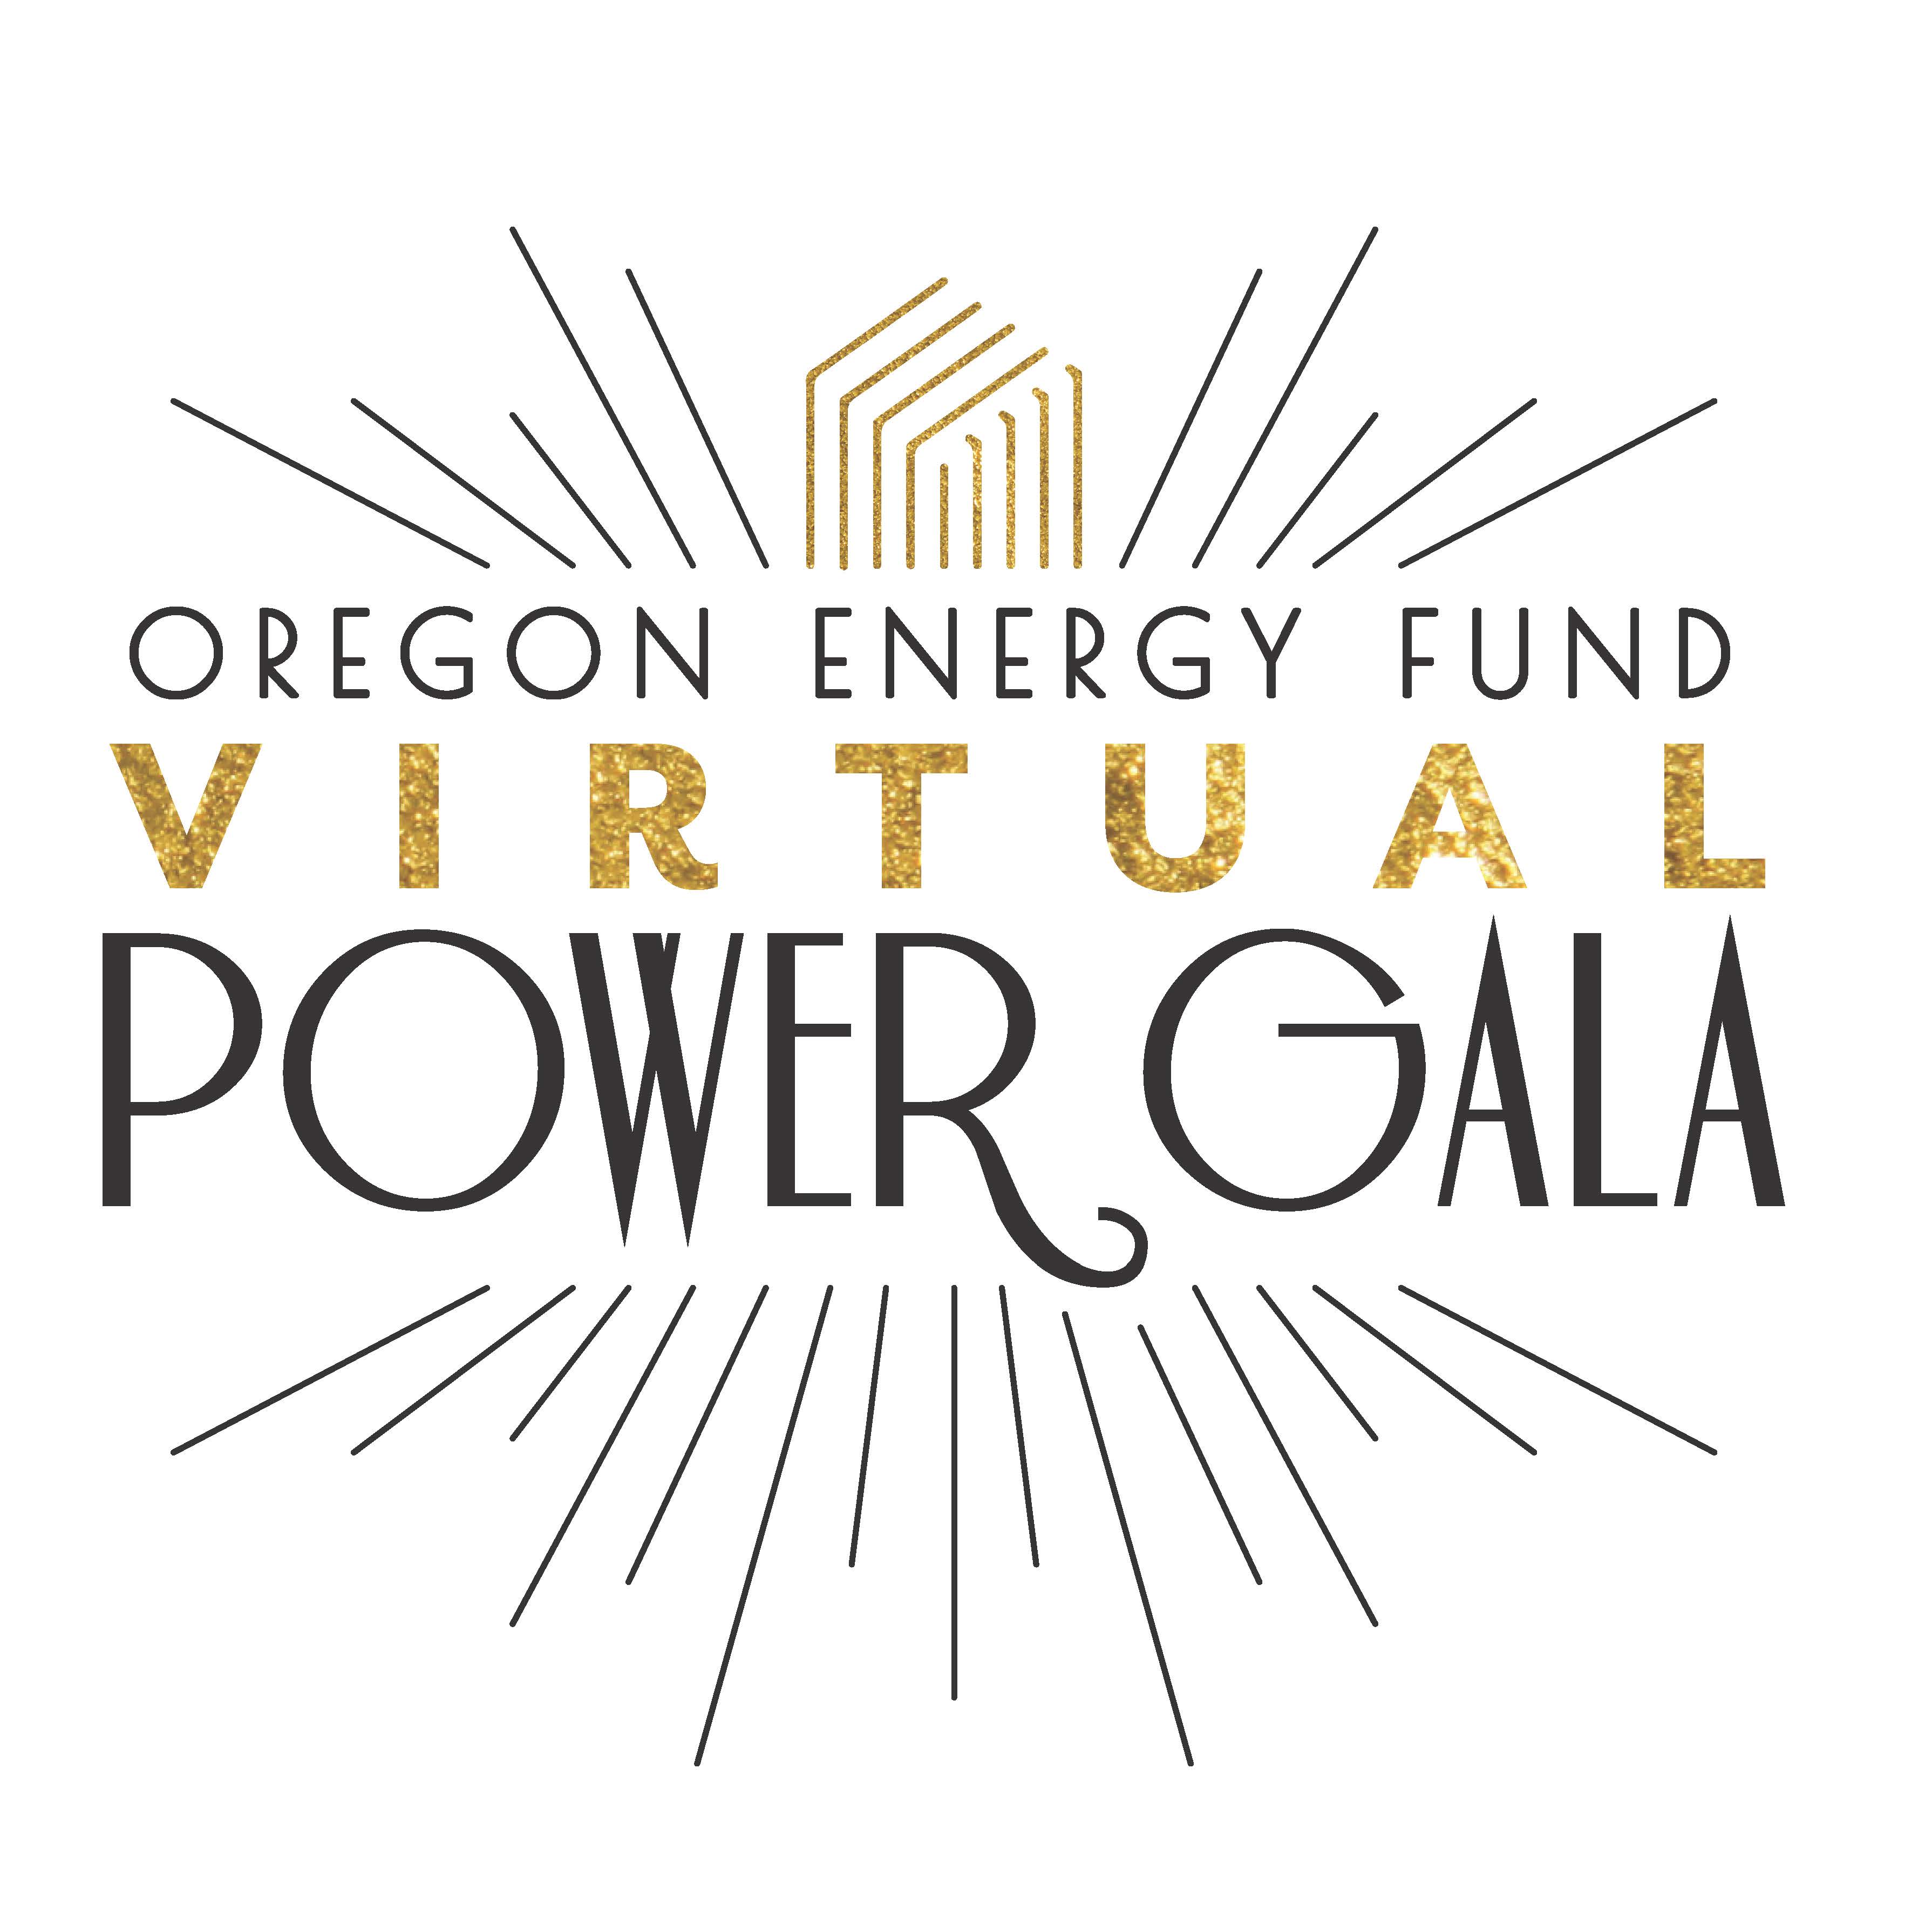 An abstract design of a house sits above the words Oregon Energy Fund Virtual Power Gala